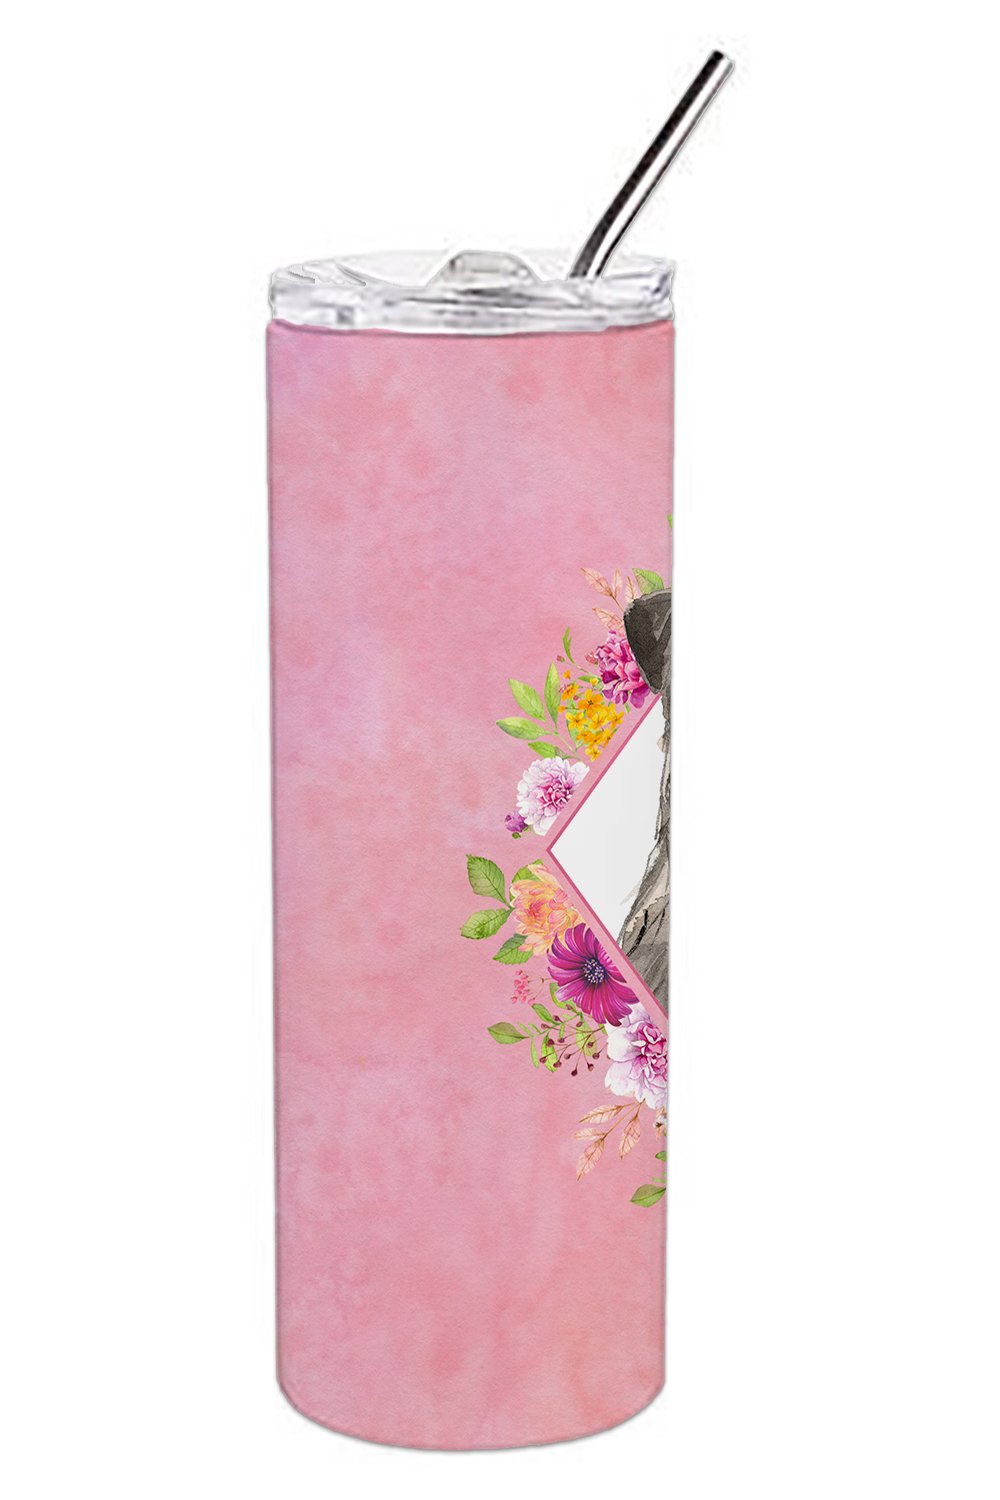 Irish Wolfhound Pink Flowers Double Walled Stainless Steel 20 oz Skinny Tumbler CK4231TBL20 by Caroline's Treasures